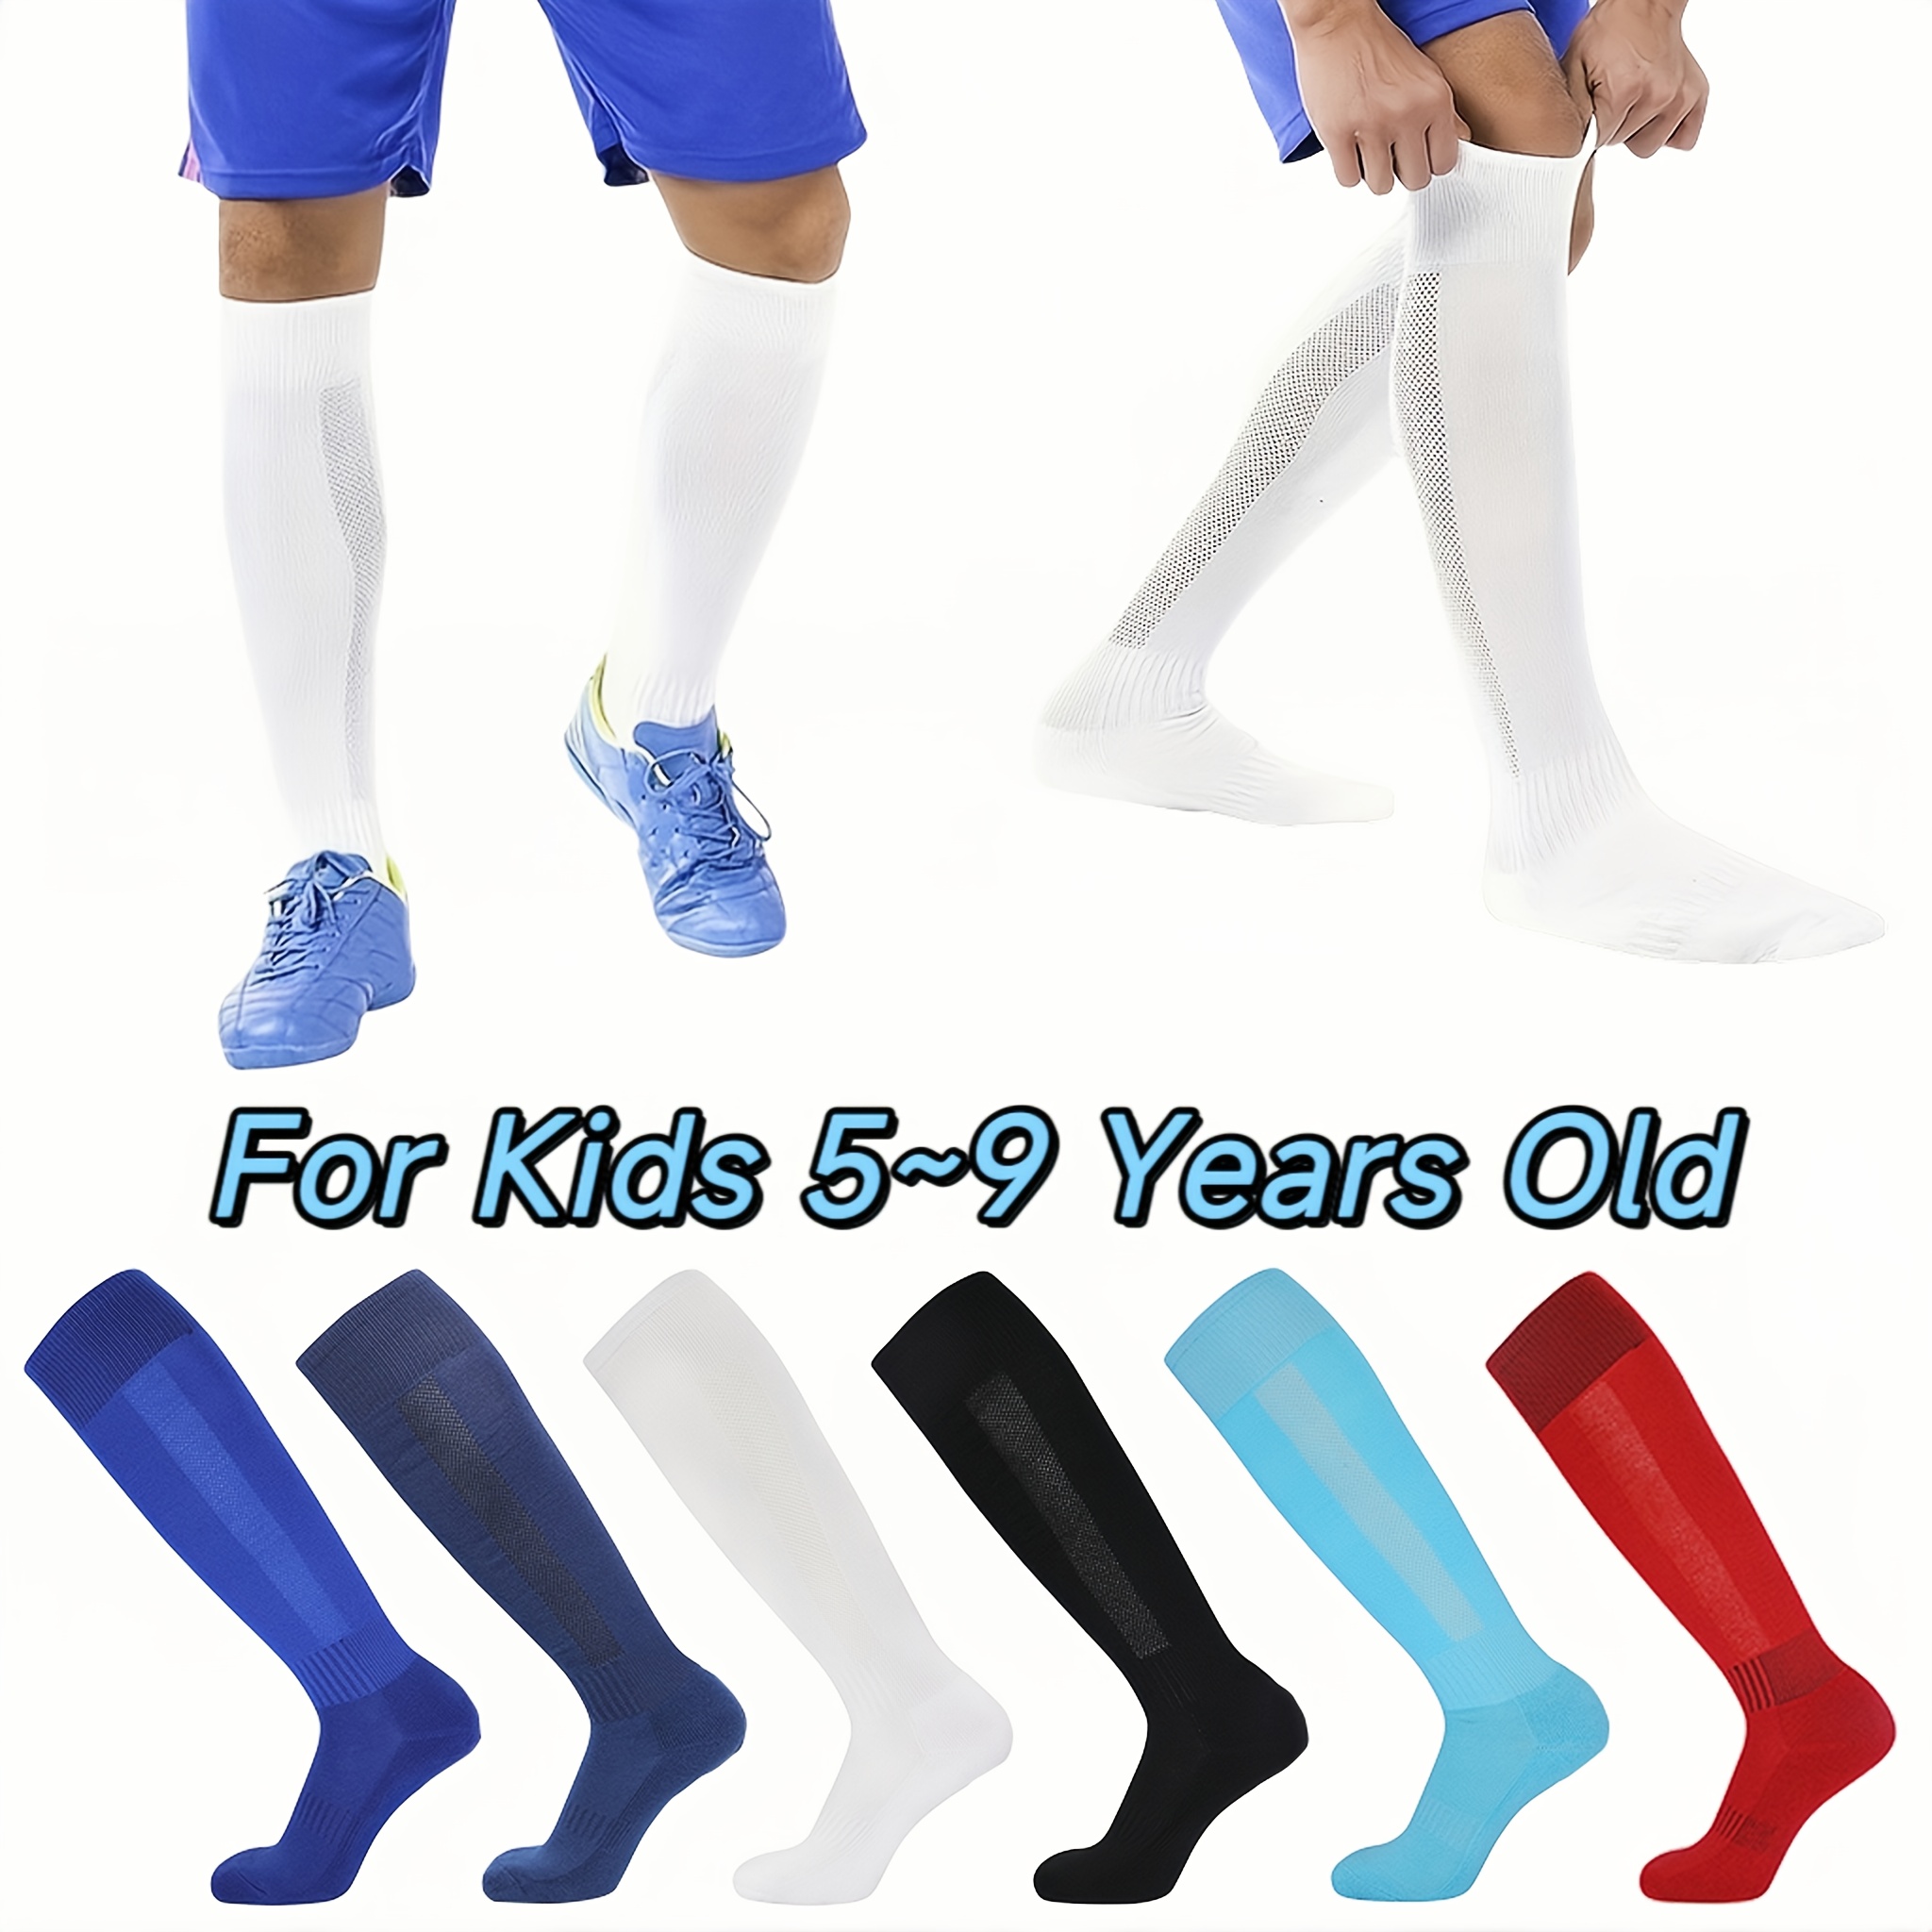 

1 Pair Boy's Soccer Socks, Towel Sole Comfy Breathable Solid Knee High Socks For Boy's Football Training Wearing